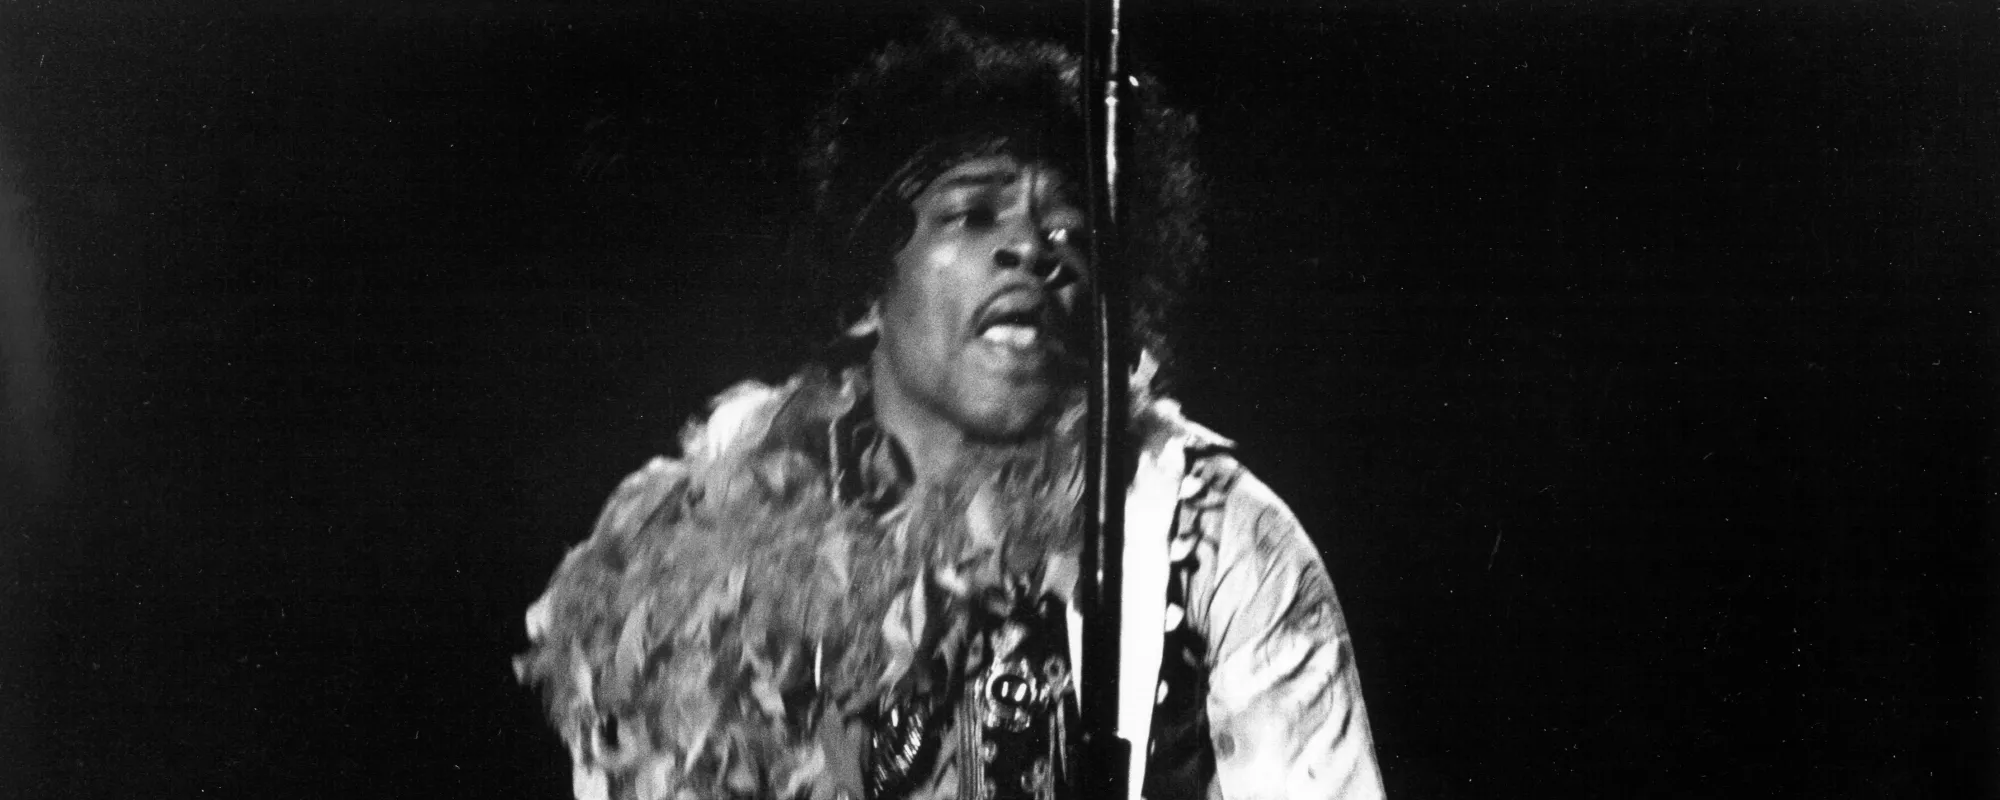 The Last Chart Appearance: The Story Behind “Crosstown Traffic” by The Jimi Hendrix Experience